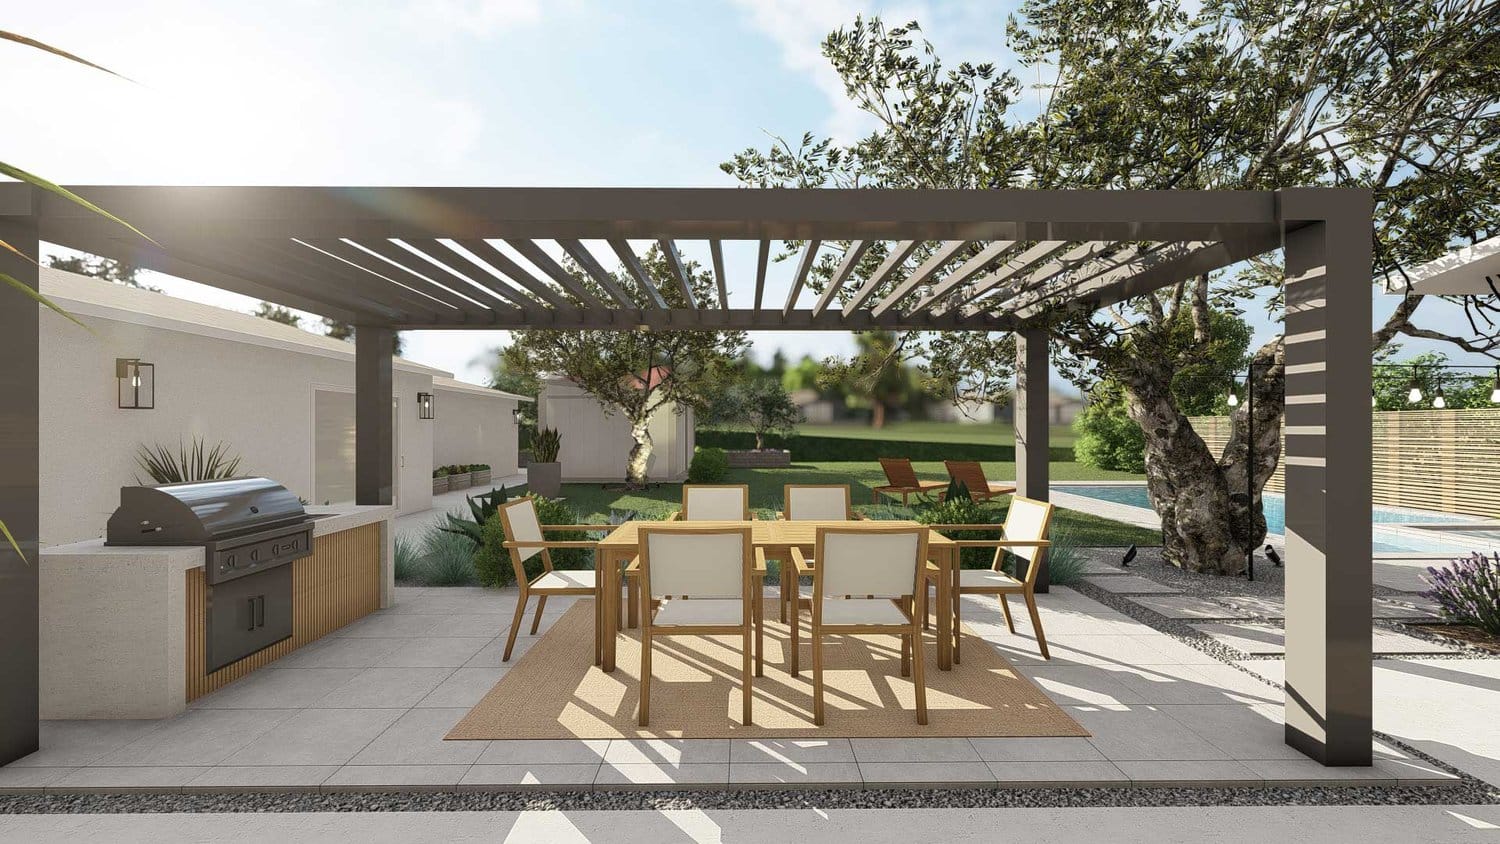 Thousand Oaks backyard paver patio with pergola over outdoor kitchen and dining set